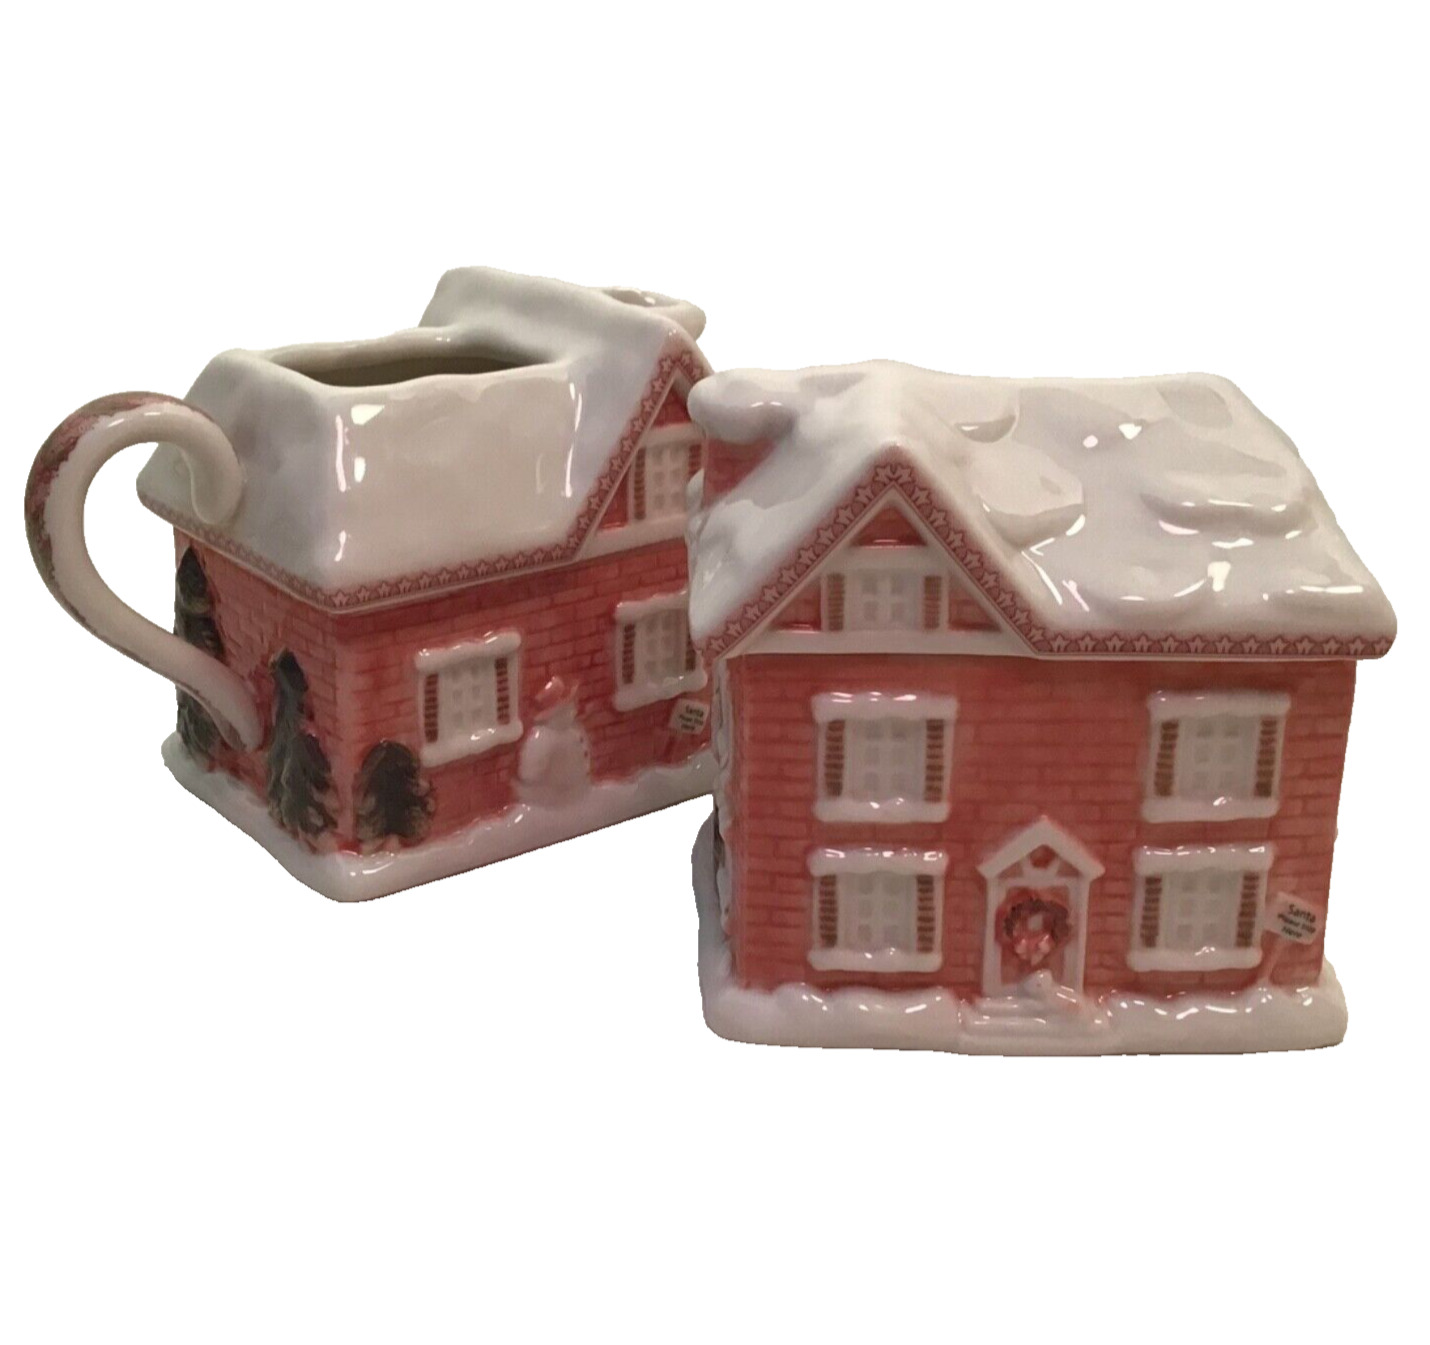 Noble Excellence Creamer & Sugar Bowl set from ‘twas the night before Christmas’